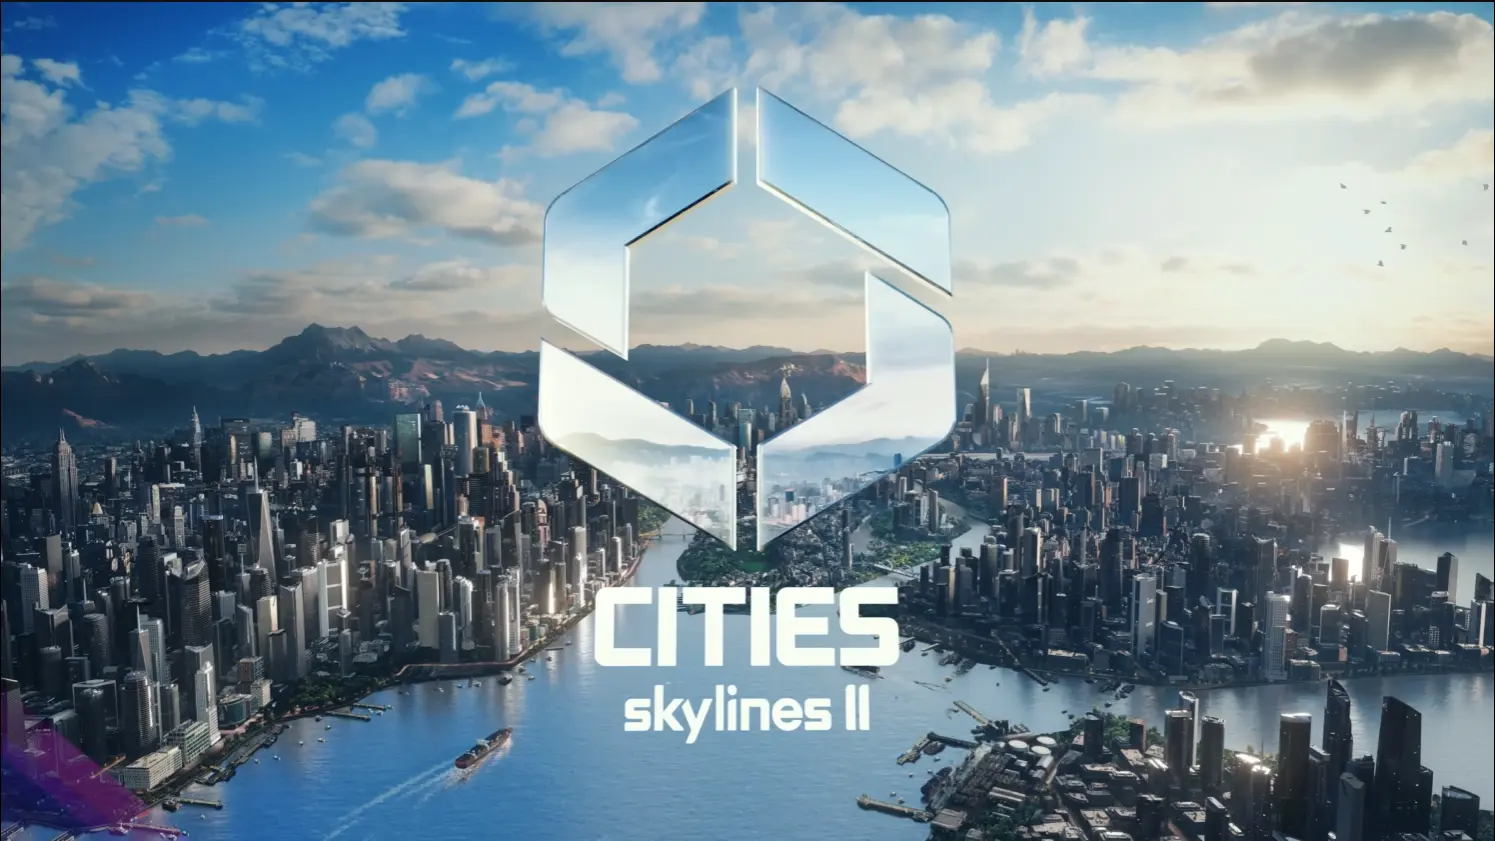 Cities Skyline 2 announced for 2023. Dynamic weather incoming?